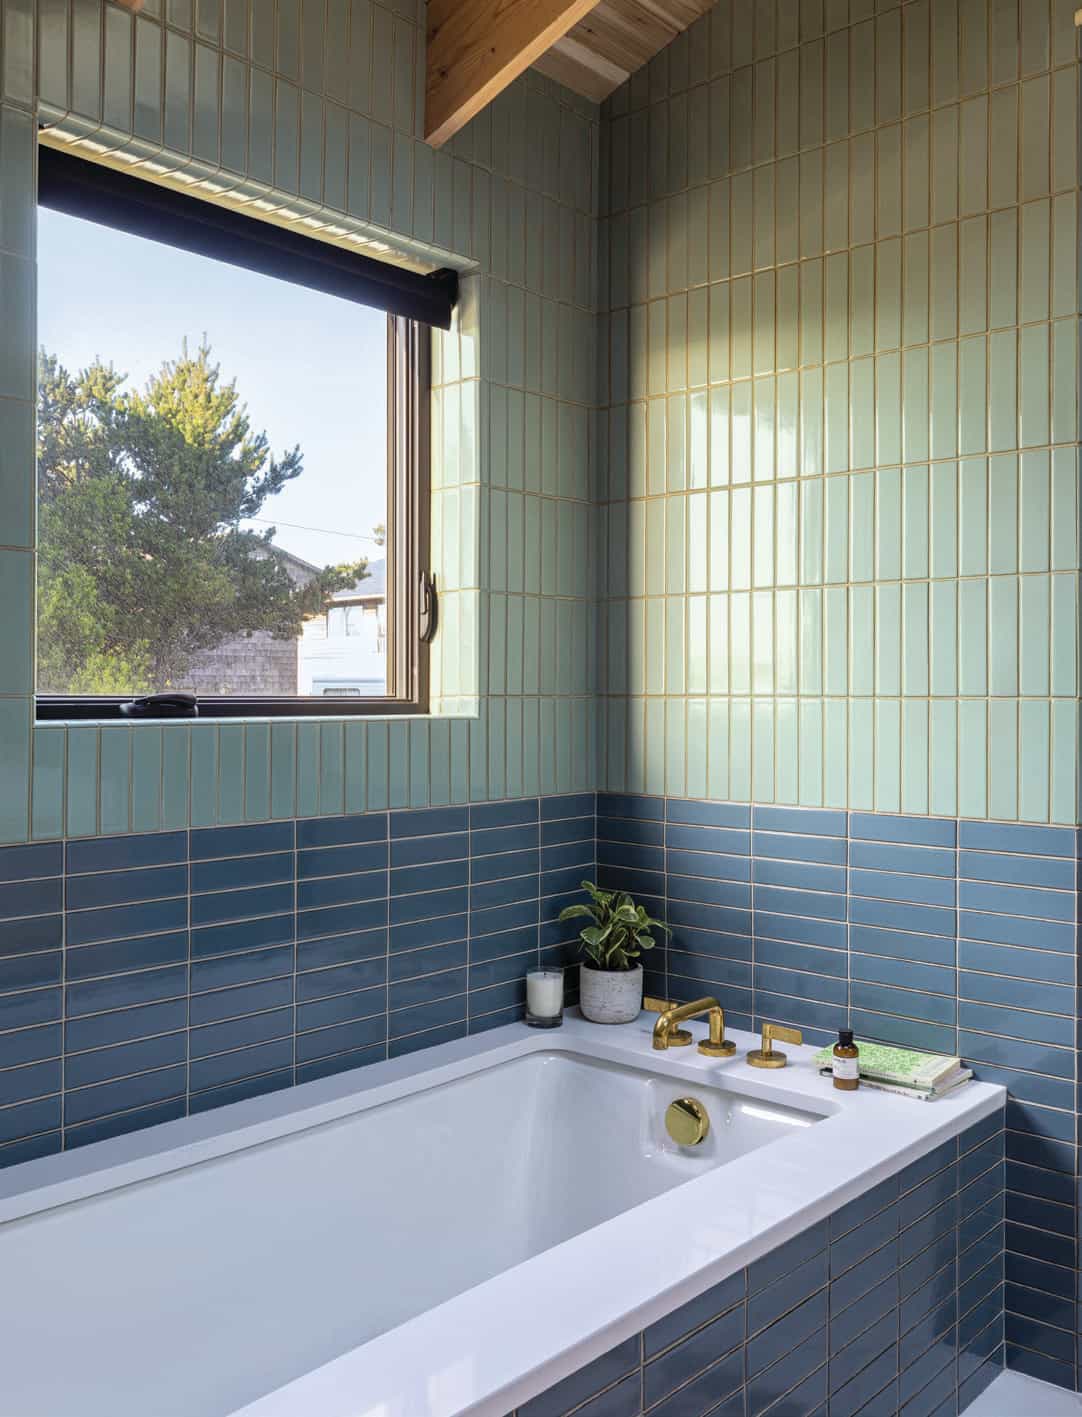 Humphrey has fun with light, and tile color and size.